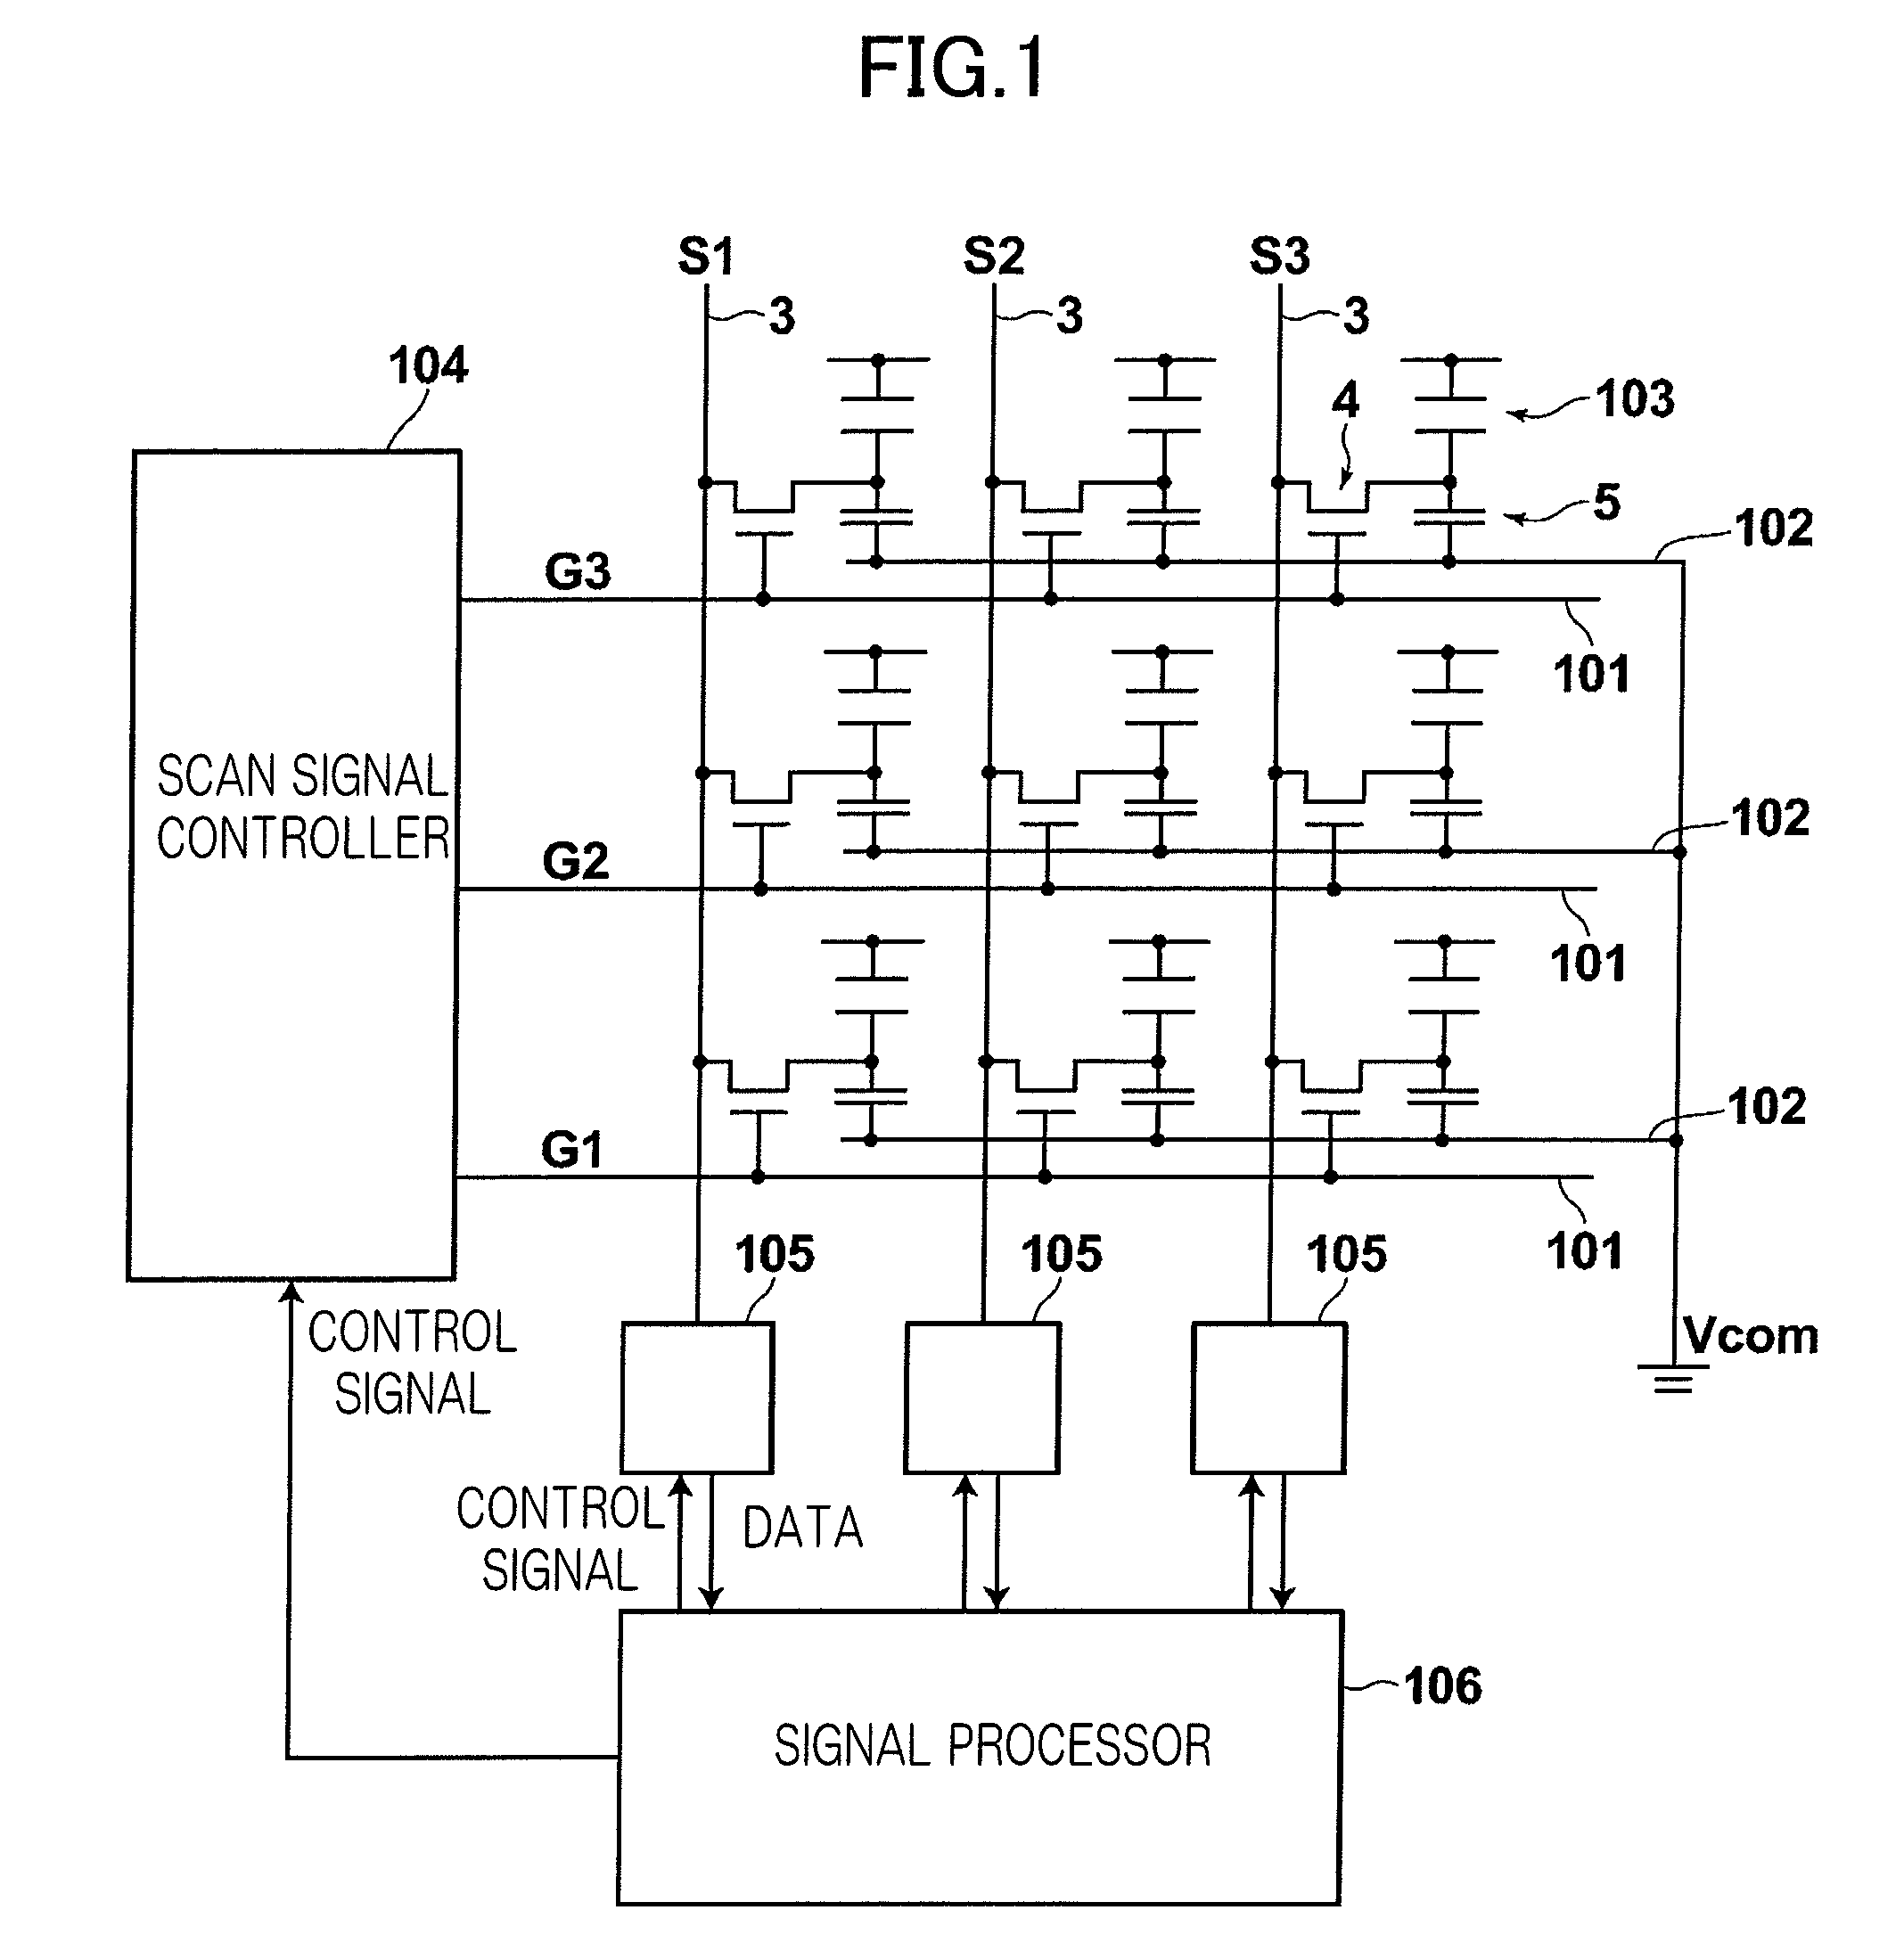 Image detector and radiation detecting system with separation of metal layers for bias, scan and data lines